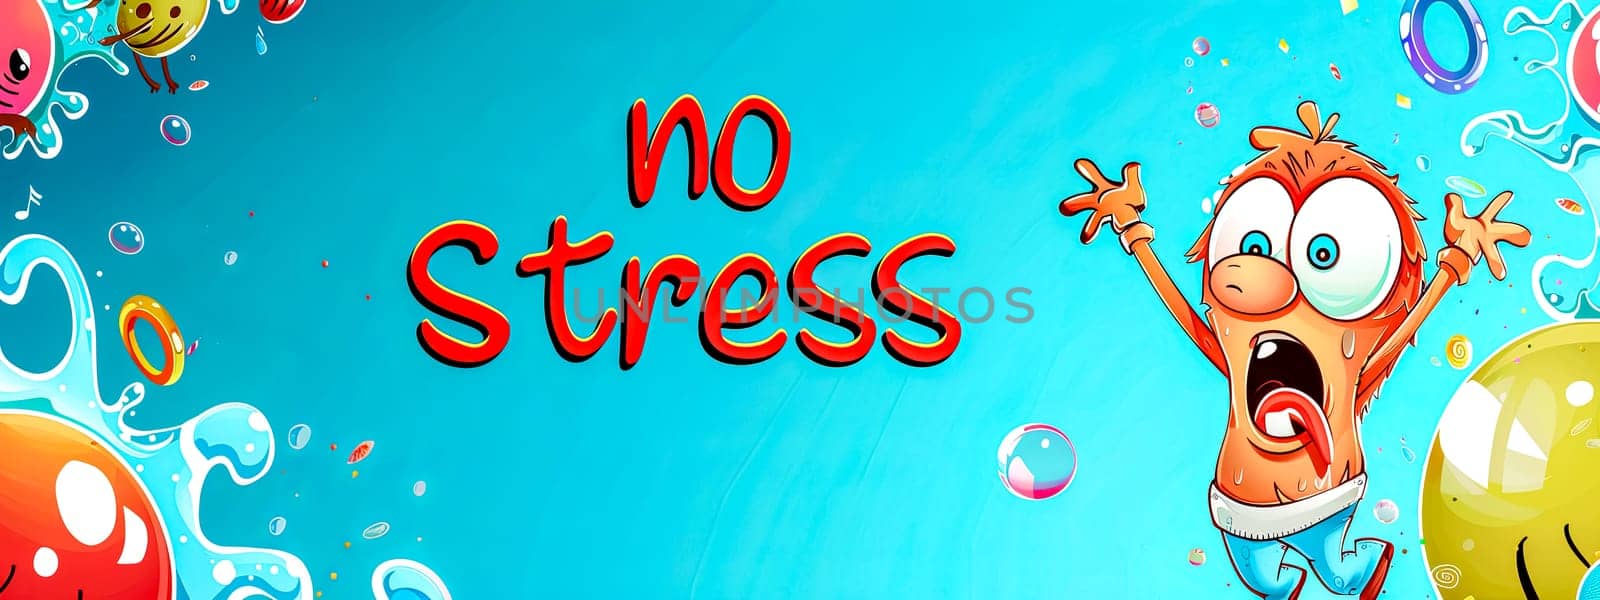 Colorful animated banner with joyful cartoon characters and a no stress message